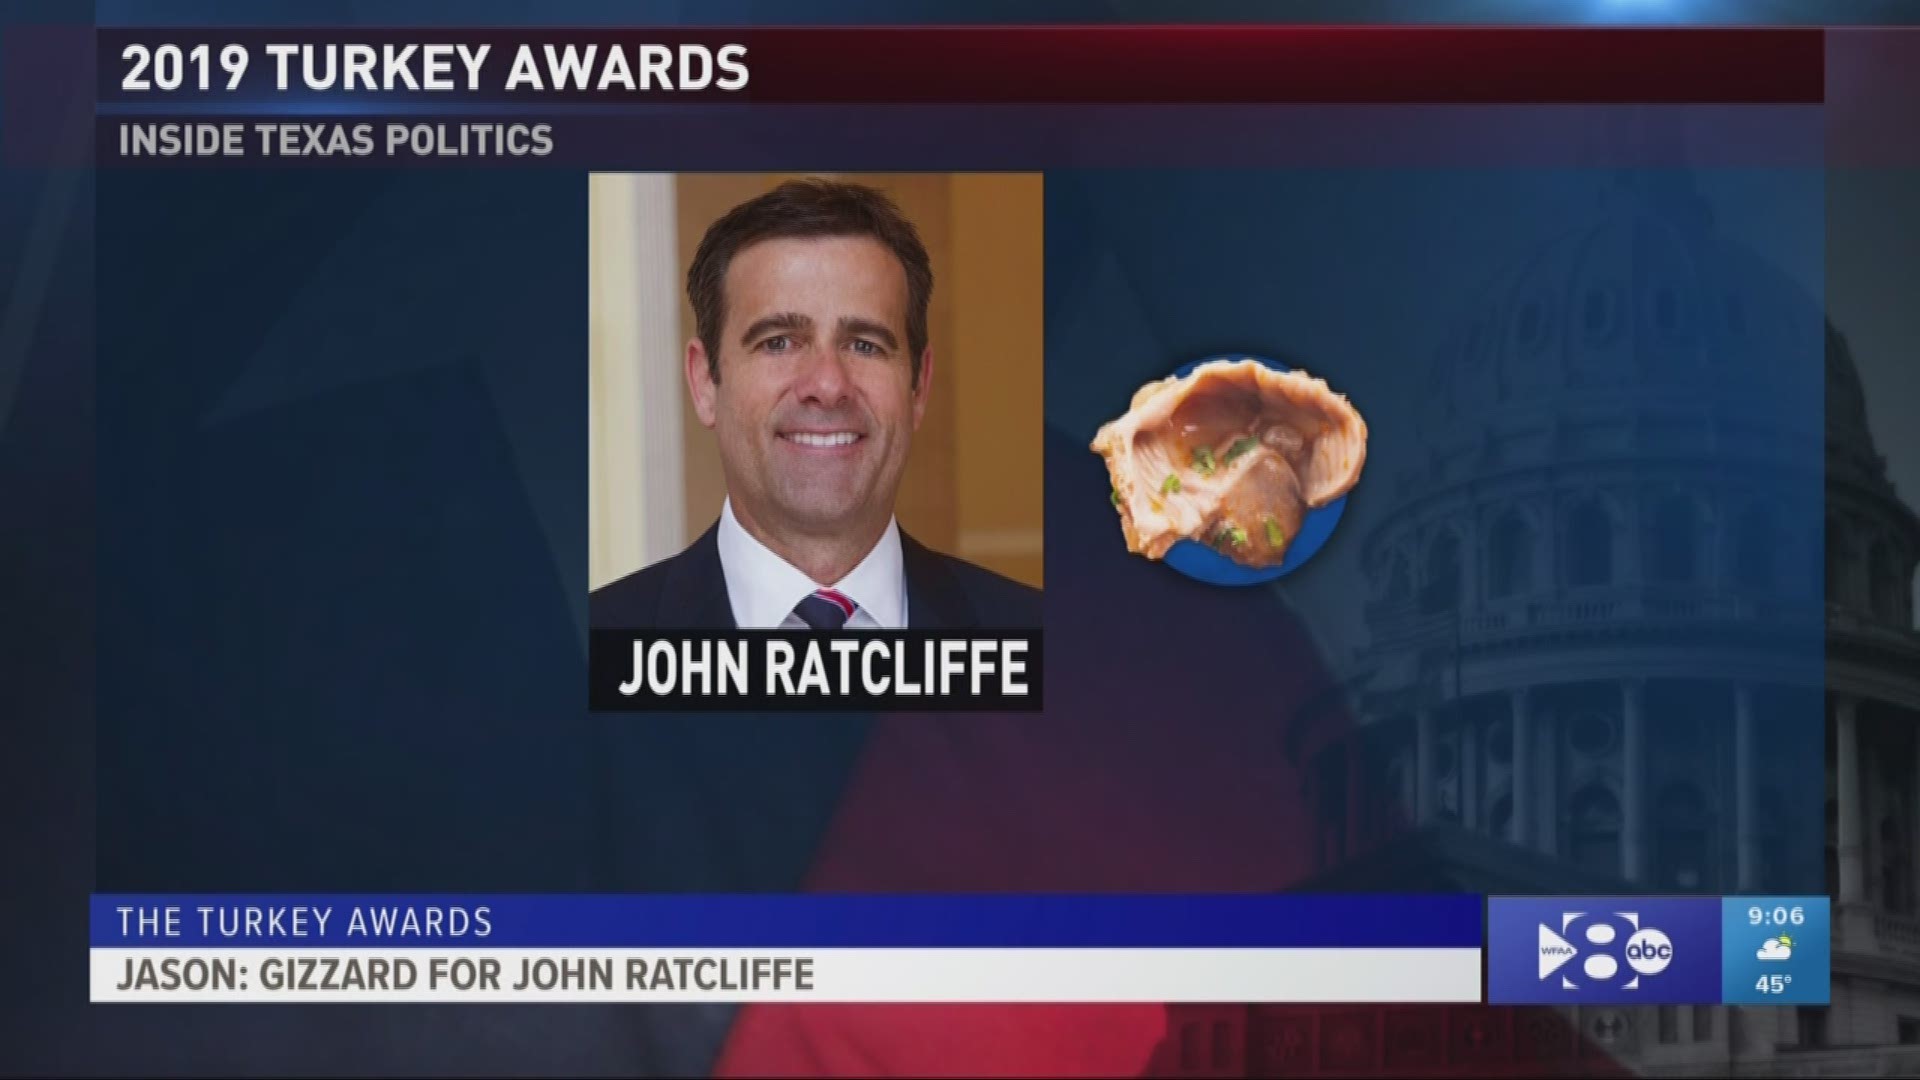 Rep. John Ratcliffe given the gizzard for losing the nomination for the Director of National Intelligence rather quickly.